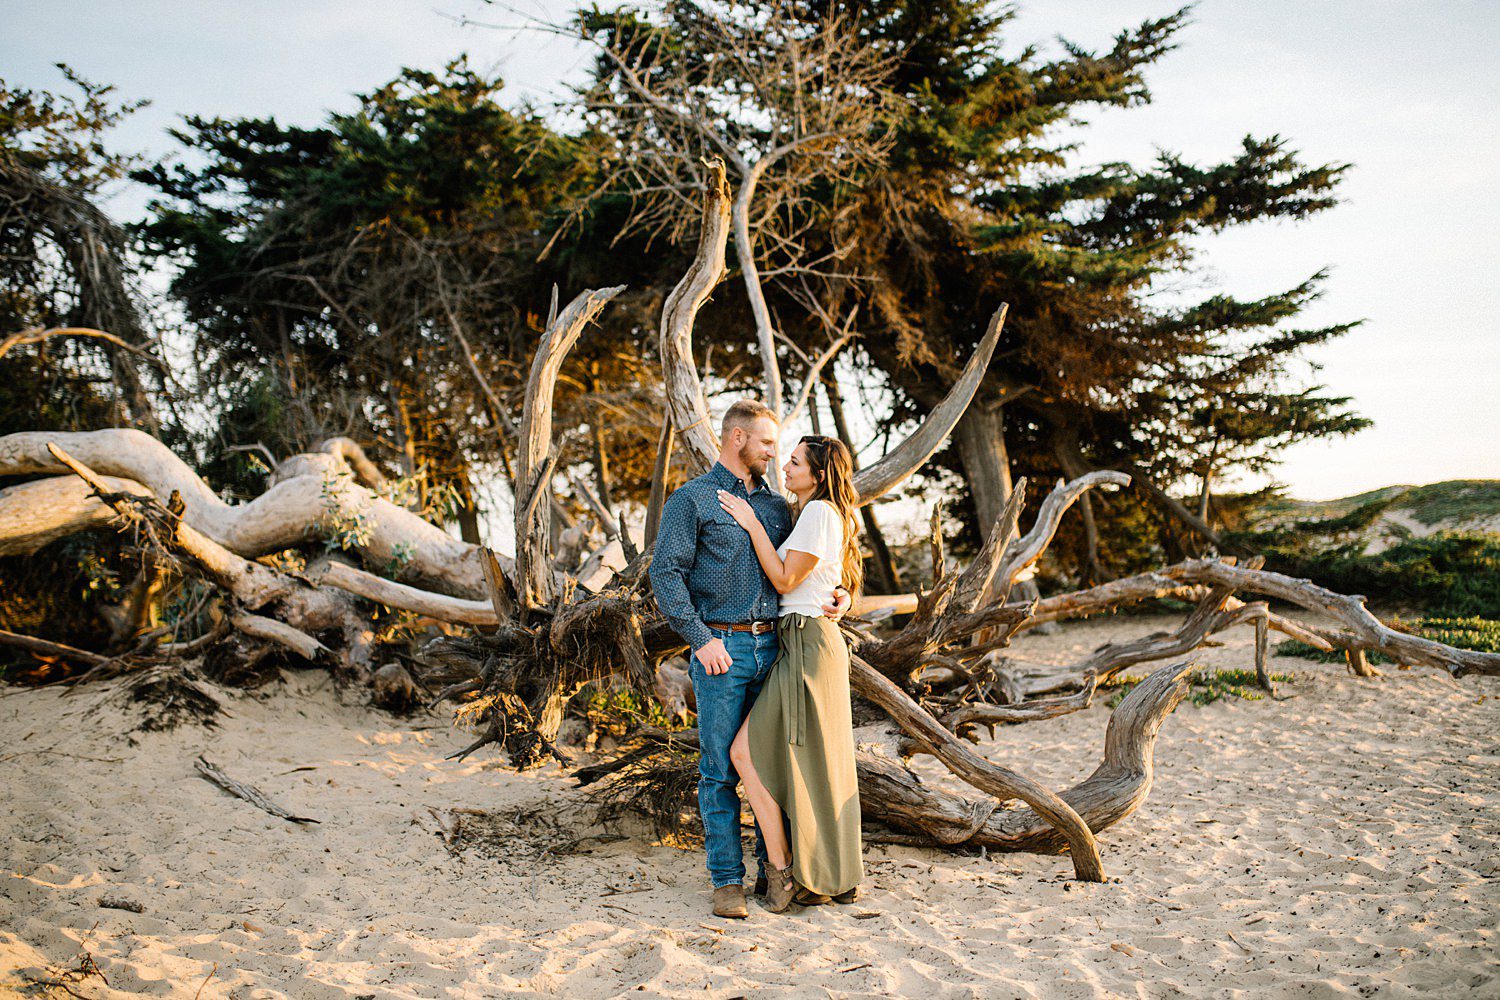 In front of fallen driftwood engagement session in Pismo Beach at Sunset by Pismo Beach Engagement Photographer Austyn Elizabeth Photography